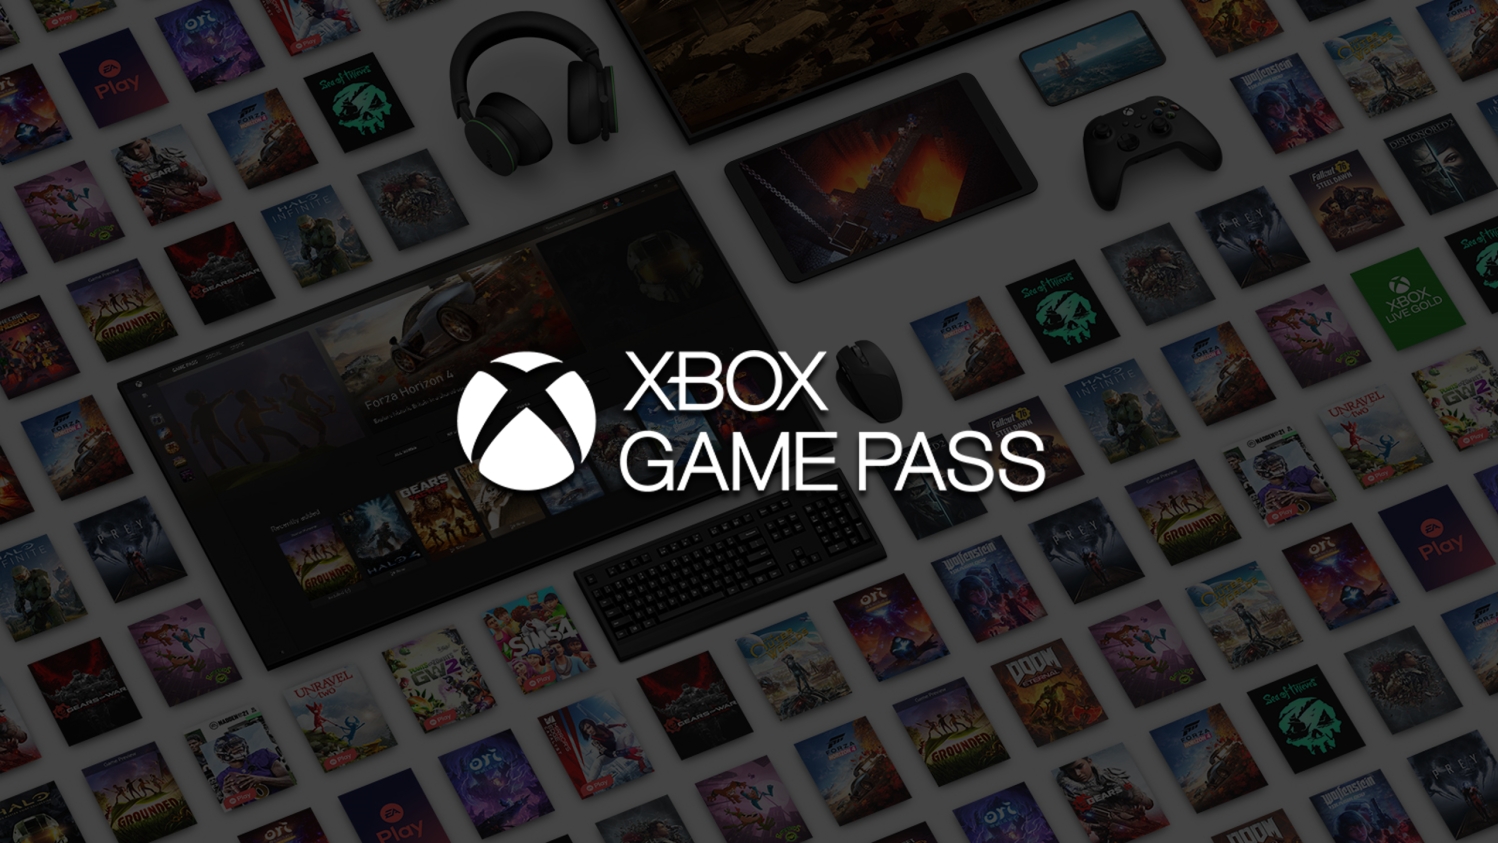 Xbox Game Pass and Xbox Series X price increases coming soon